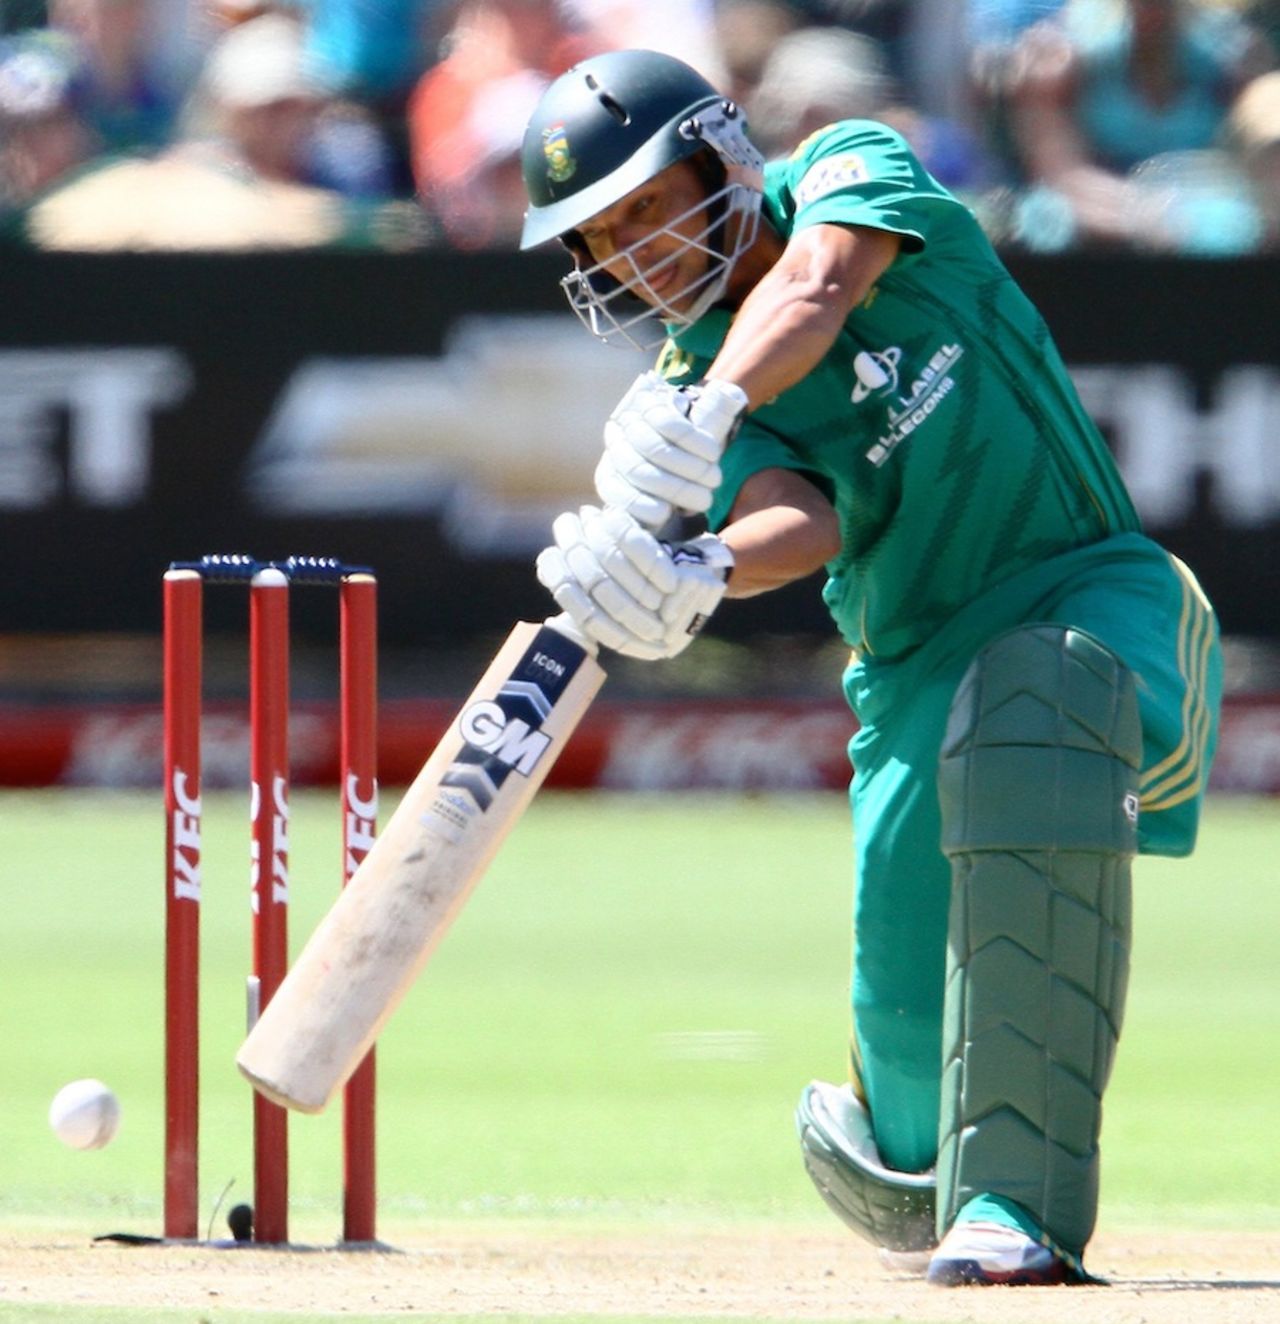 Justin Ontong drives one through cover, South Africa v New Zealand, 3rd T20, Port Elizabeth, December 26, 2012